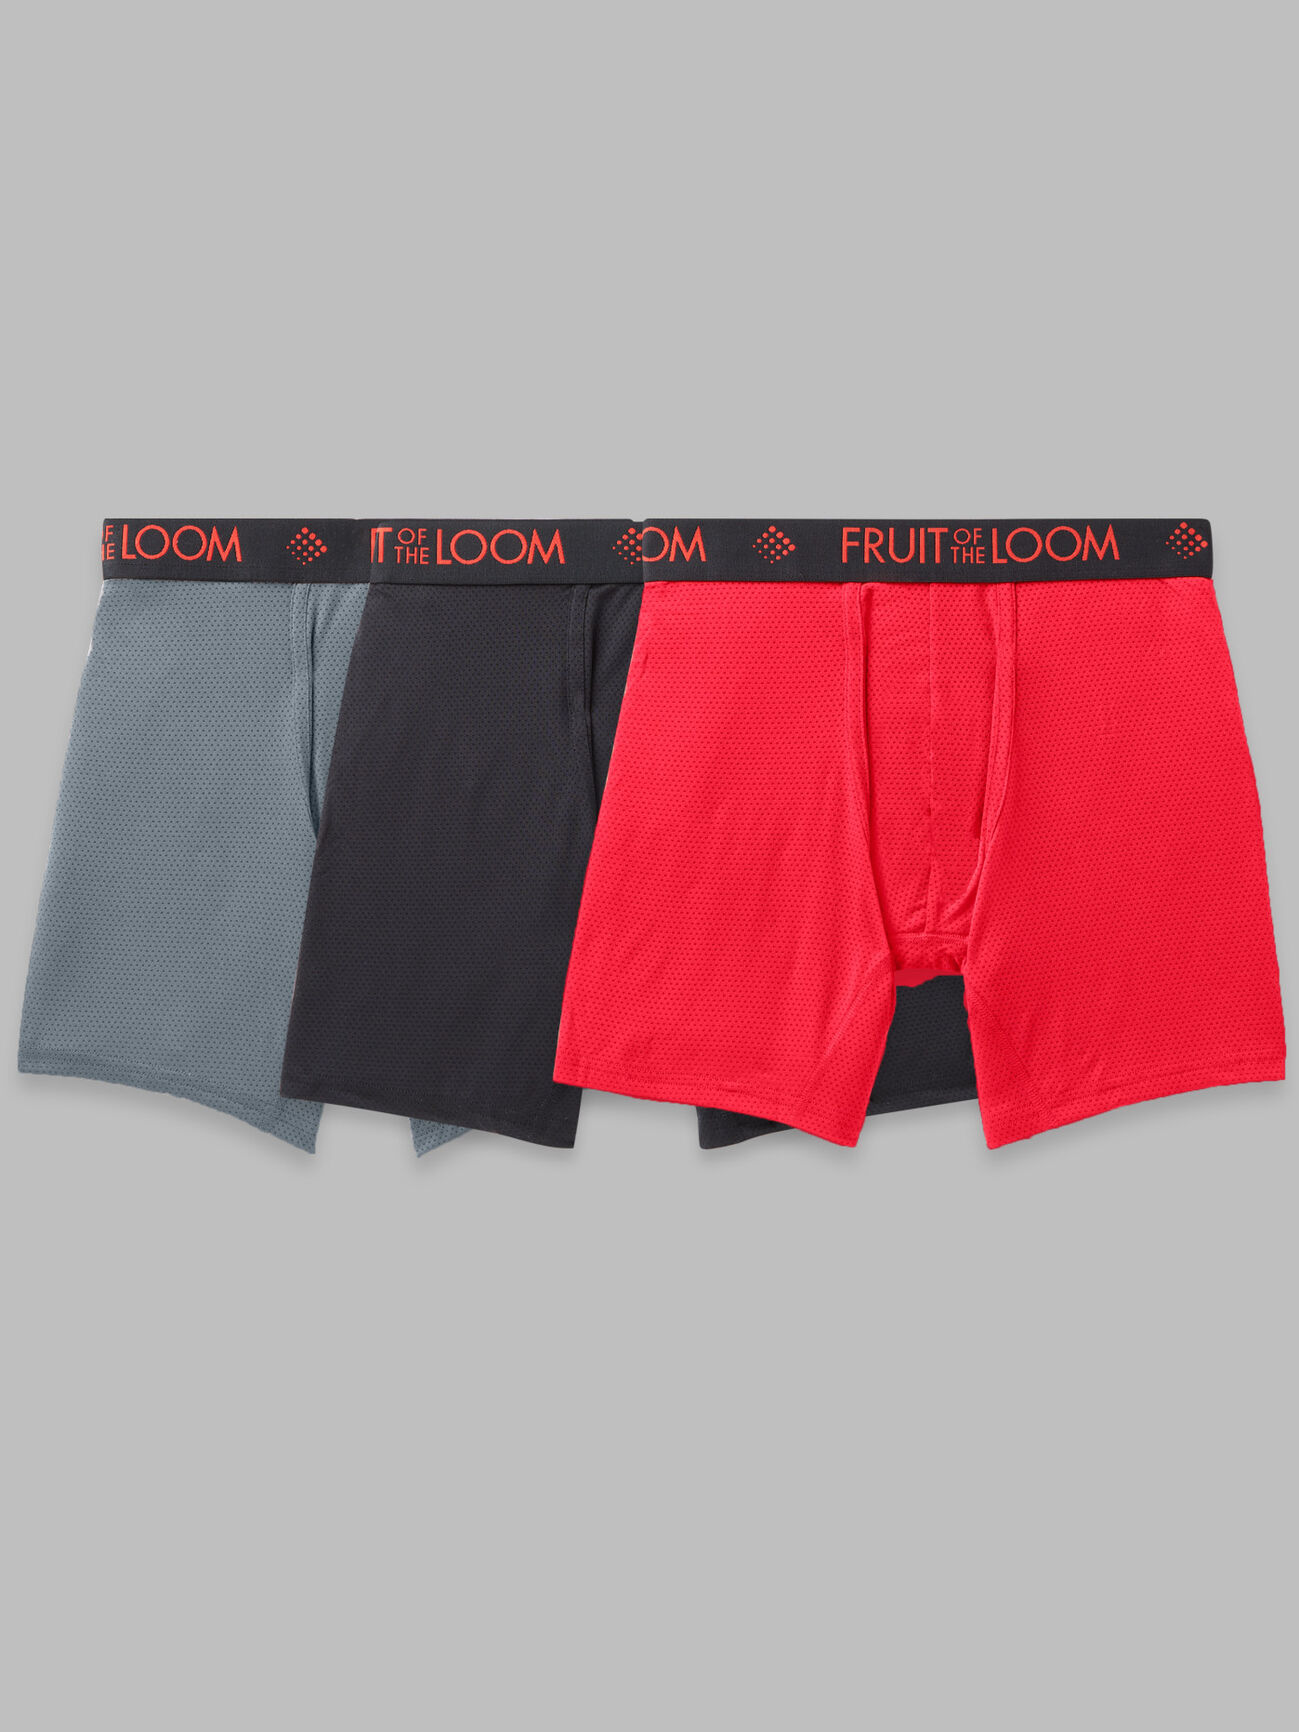 Fruit of the Loom Men's Breathable Micro-Mesh Boxer Briefs, 3 Pack